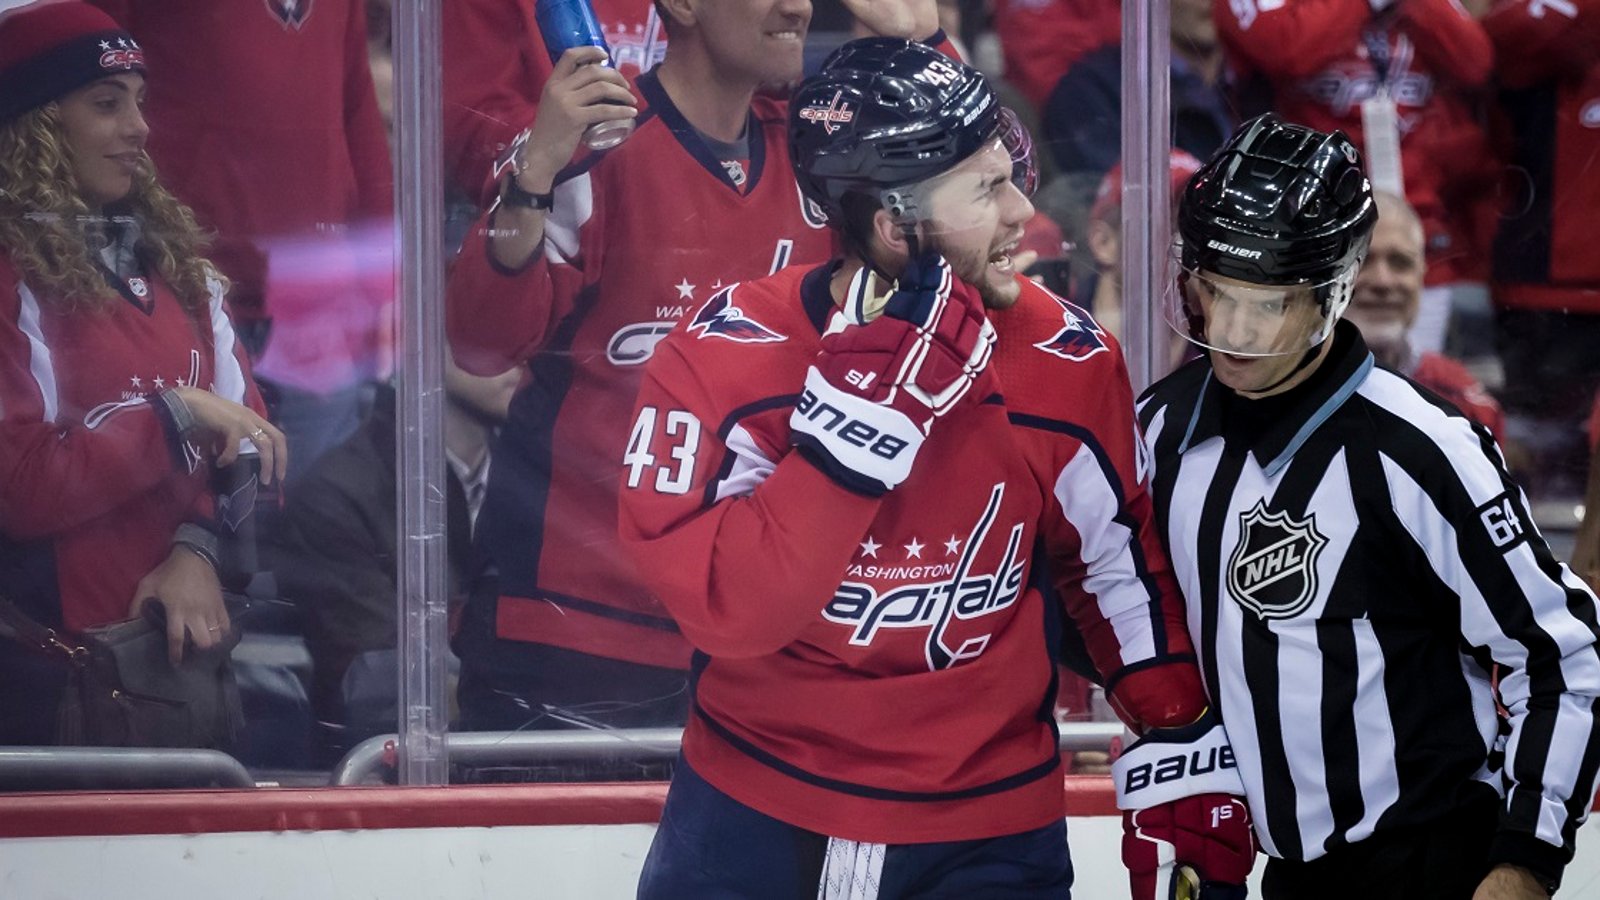 Big update on Sundqvist hit may mean big trouble for Tom Wilson.